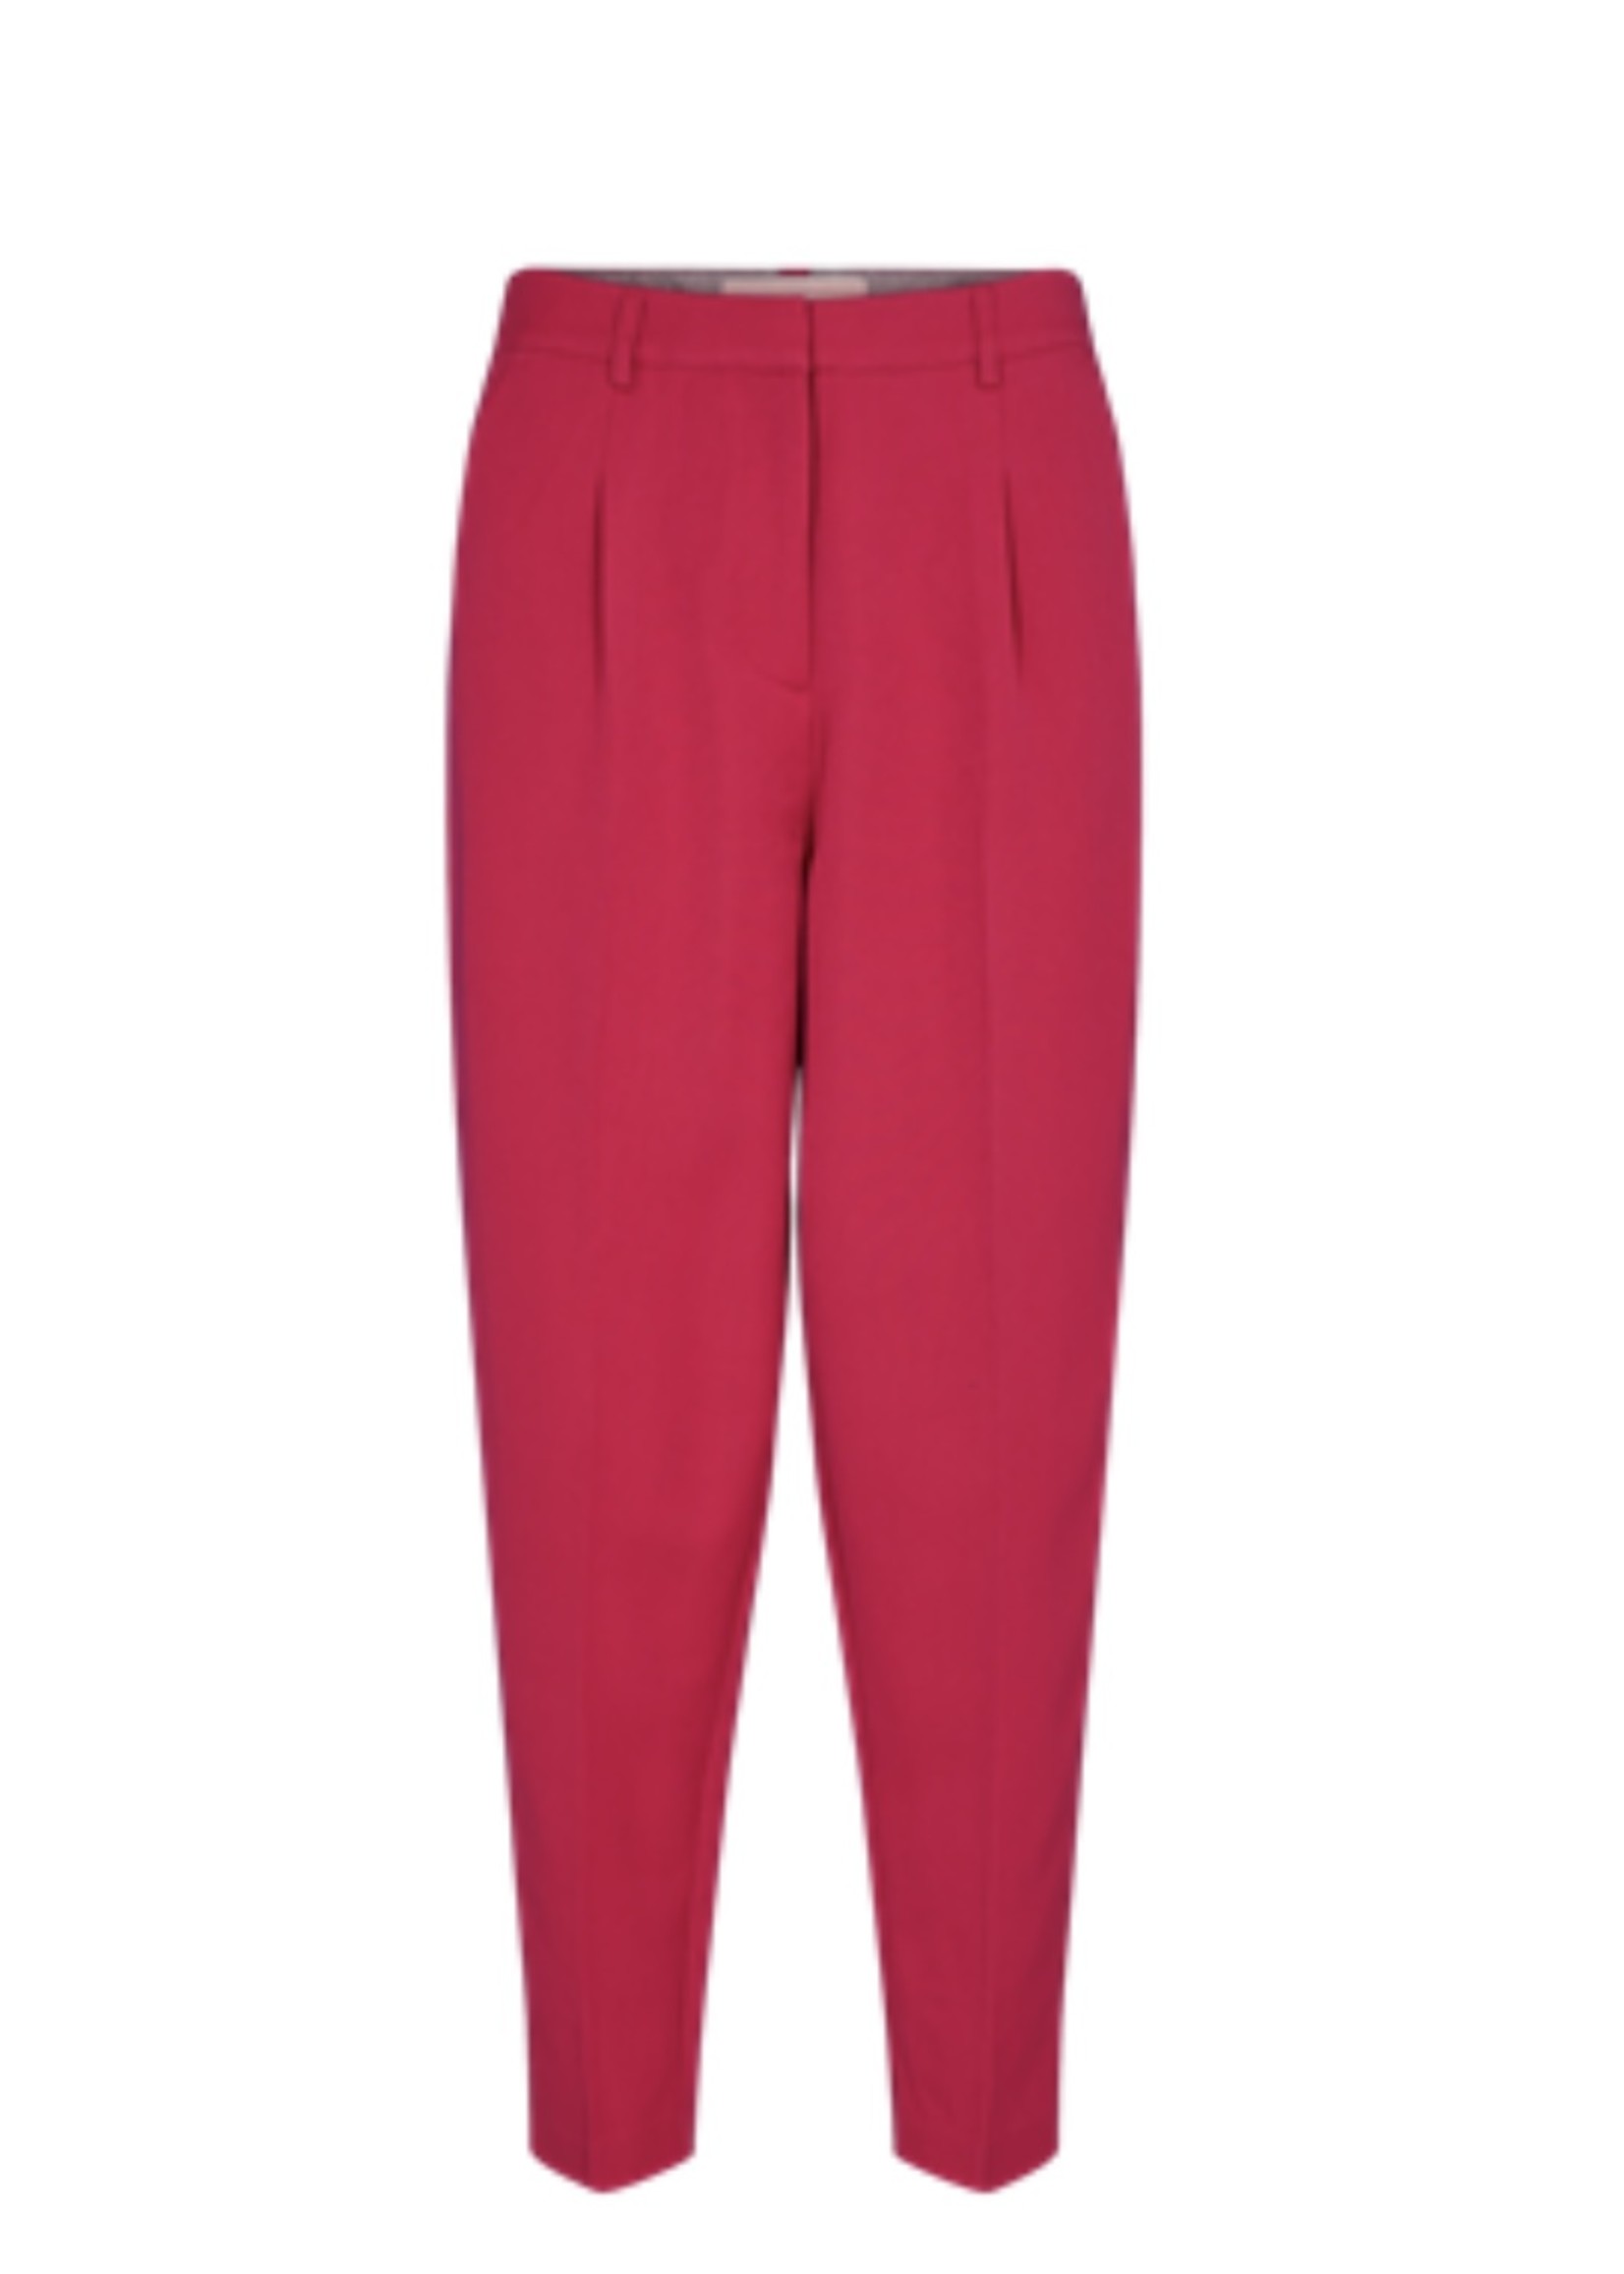 Freequent Kitte - Pant - Cerise